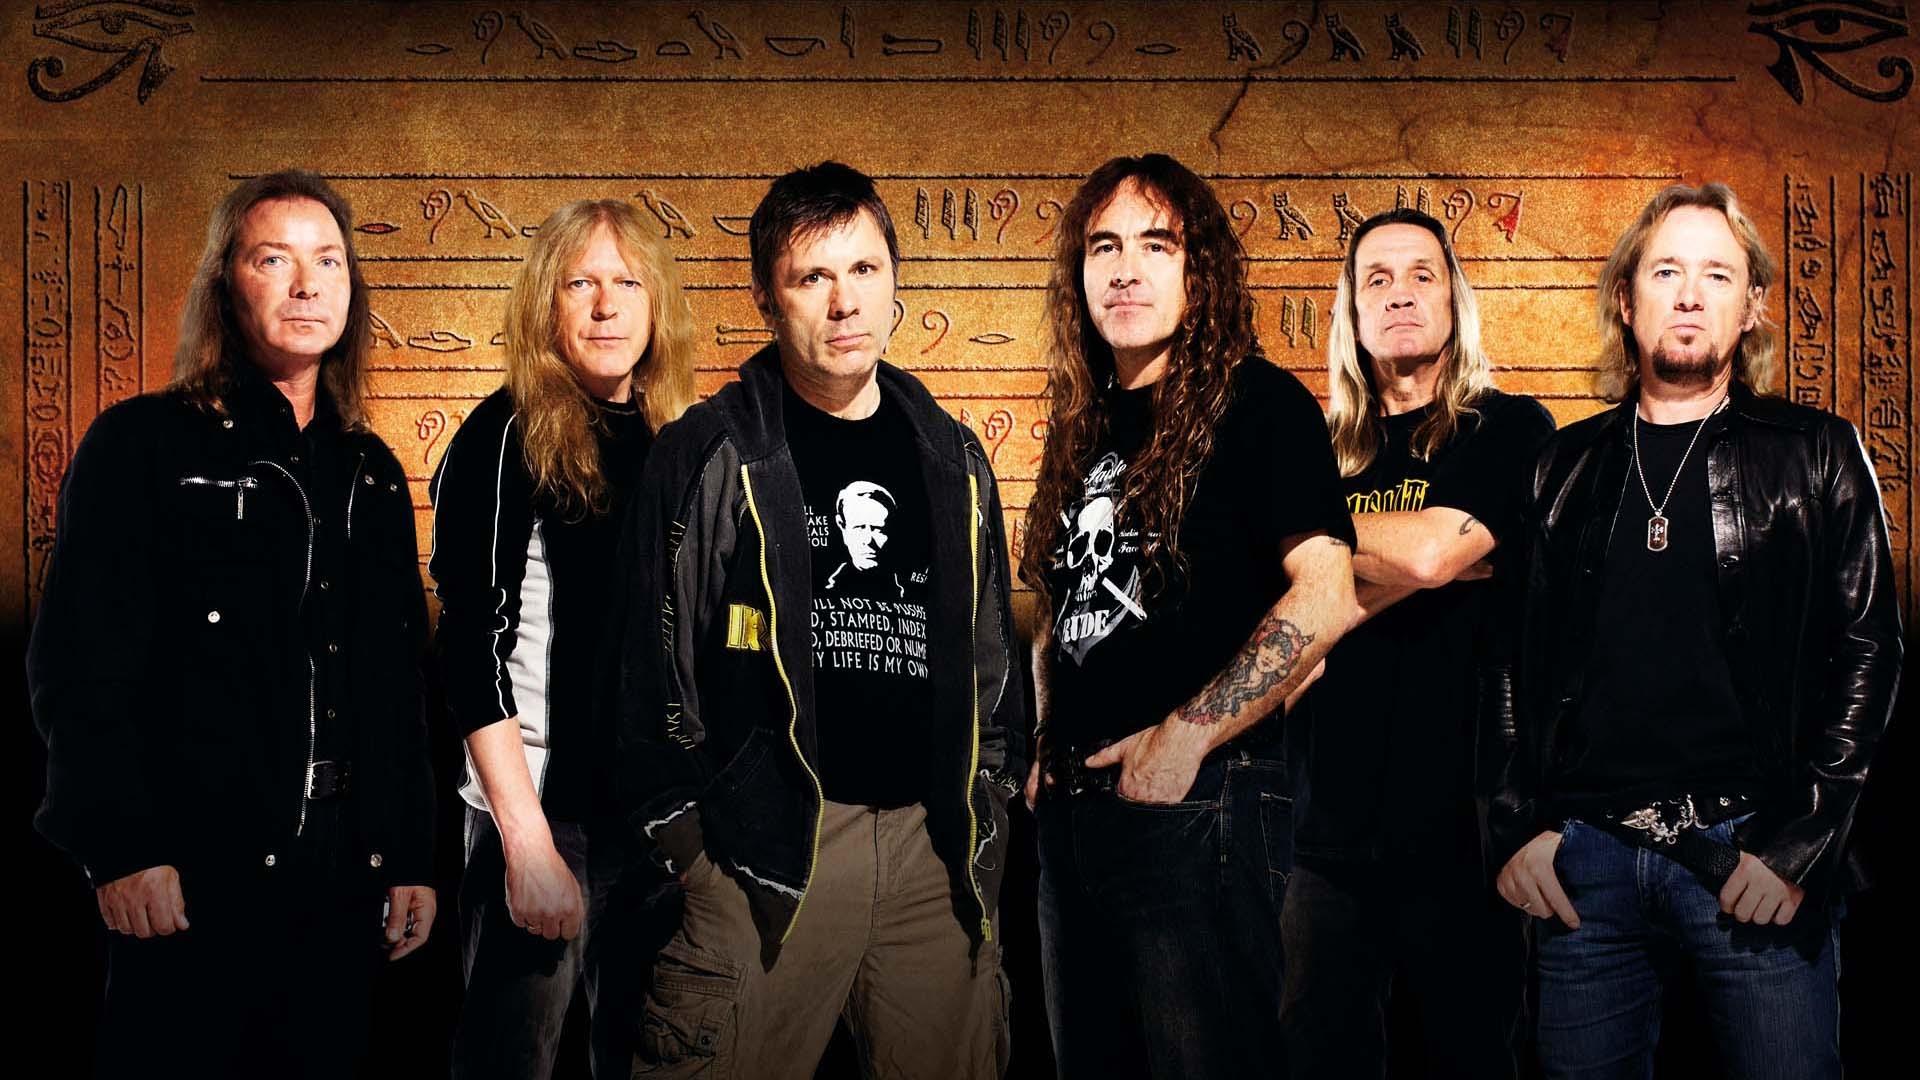 iron_maiden_band_faces_graphics_tattoo_12969_1920x1080